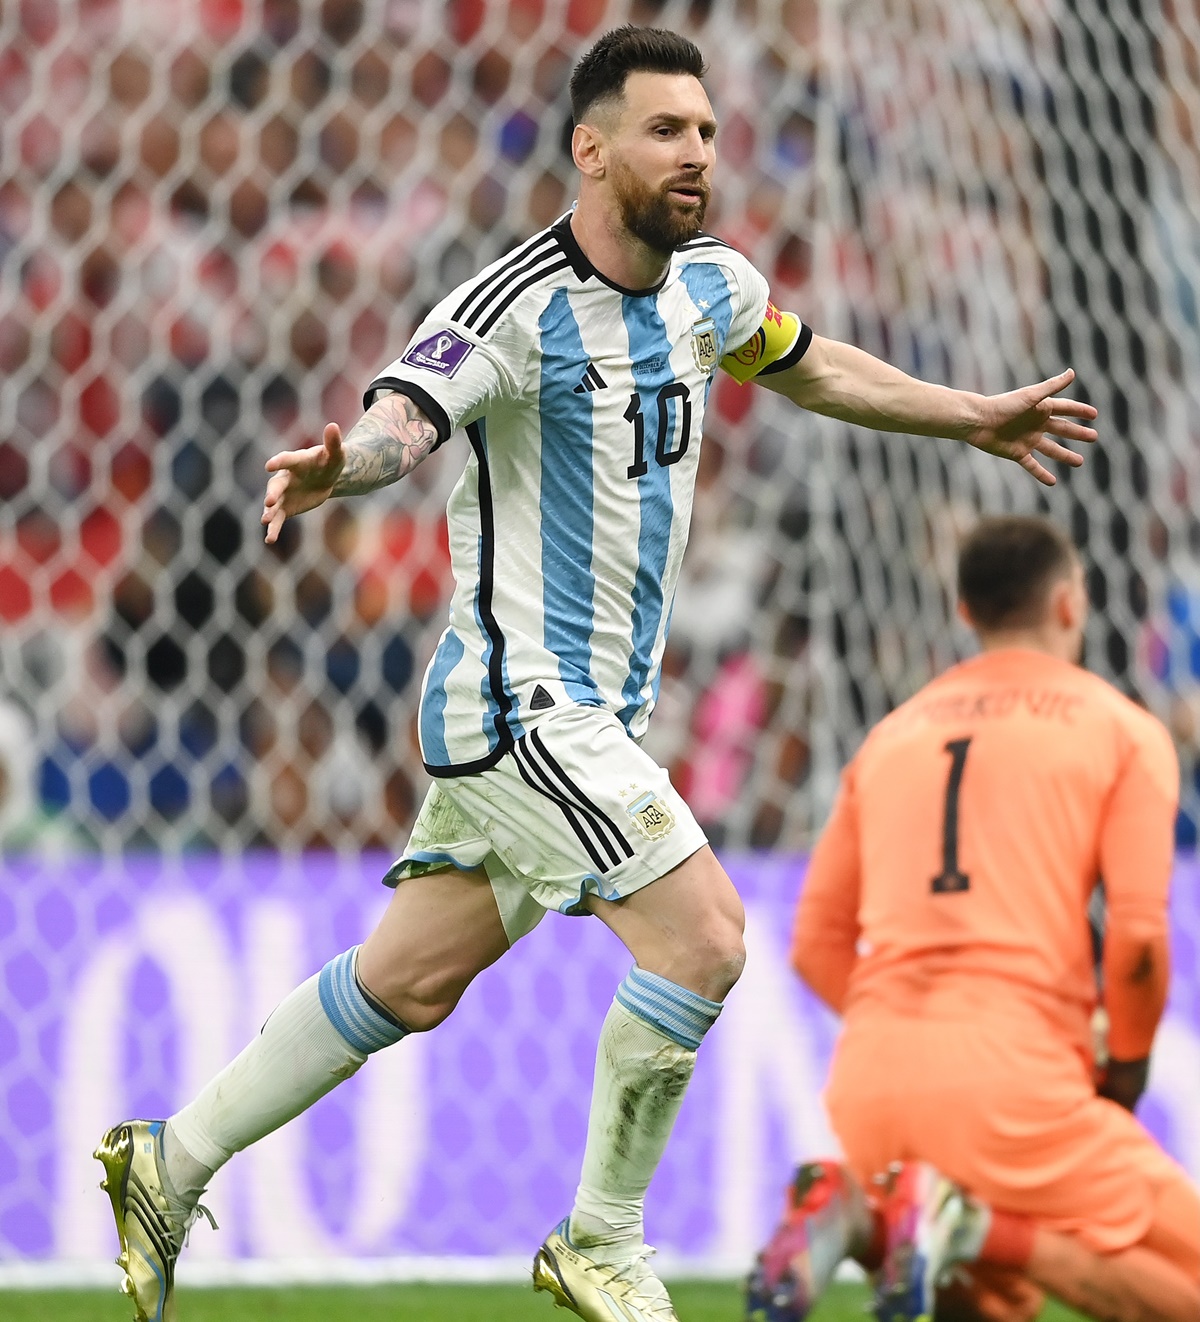 Seven-times Ballon d'Or wonner Lionel Messi led Argentina to the FIFA World Cup title last December